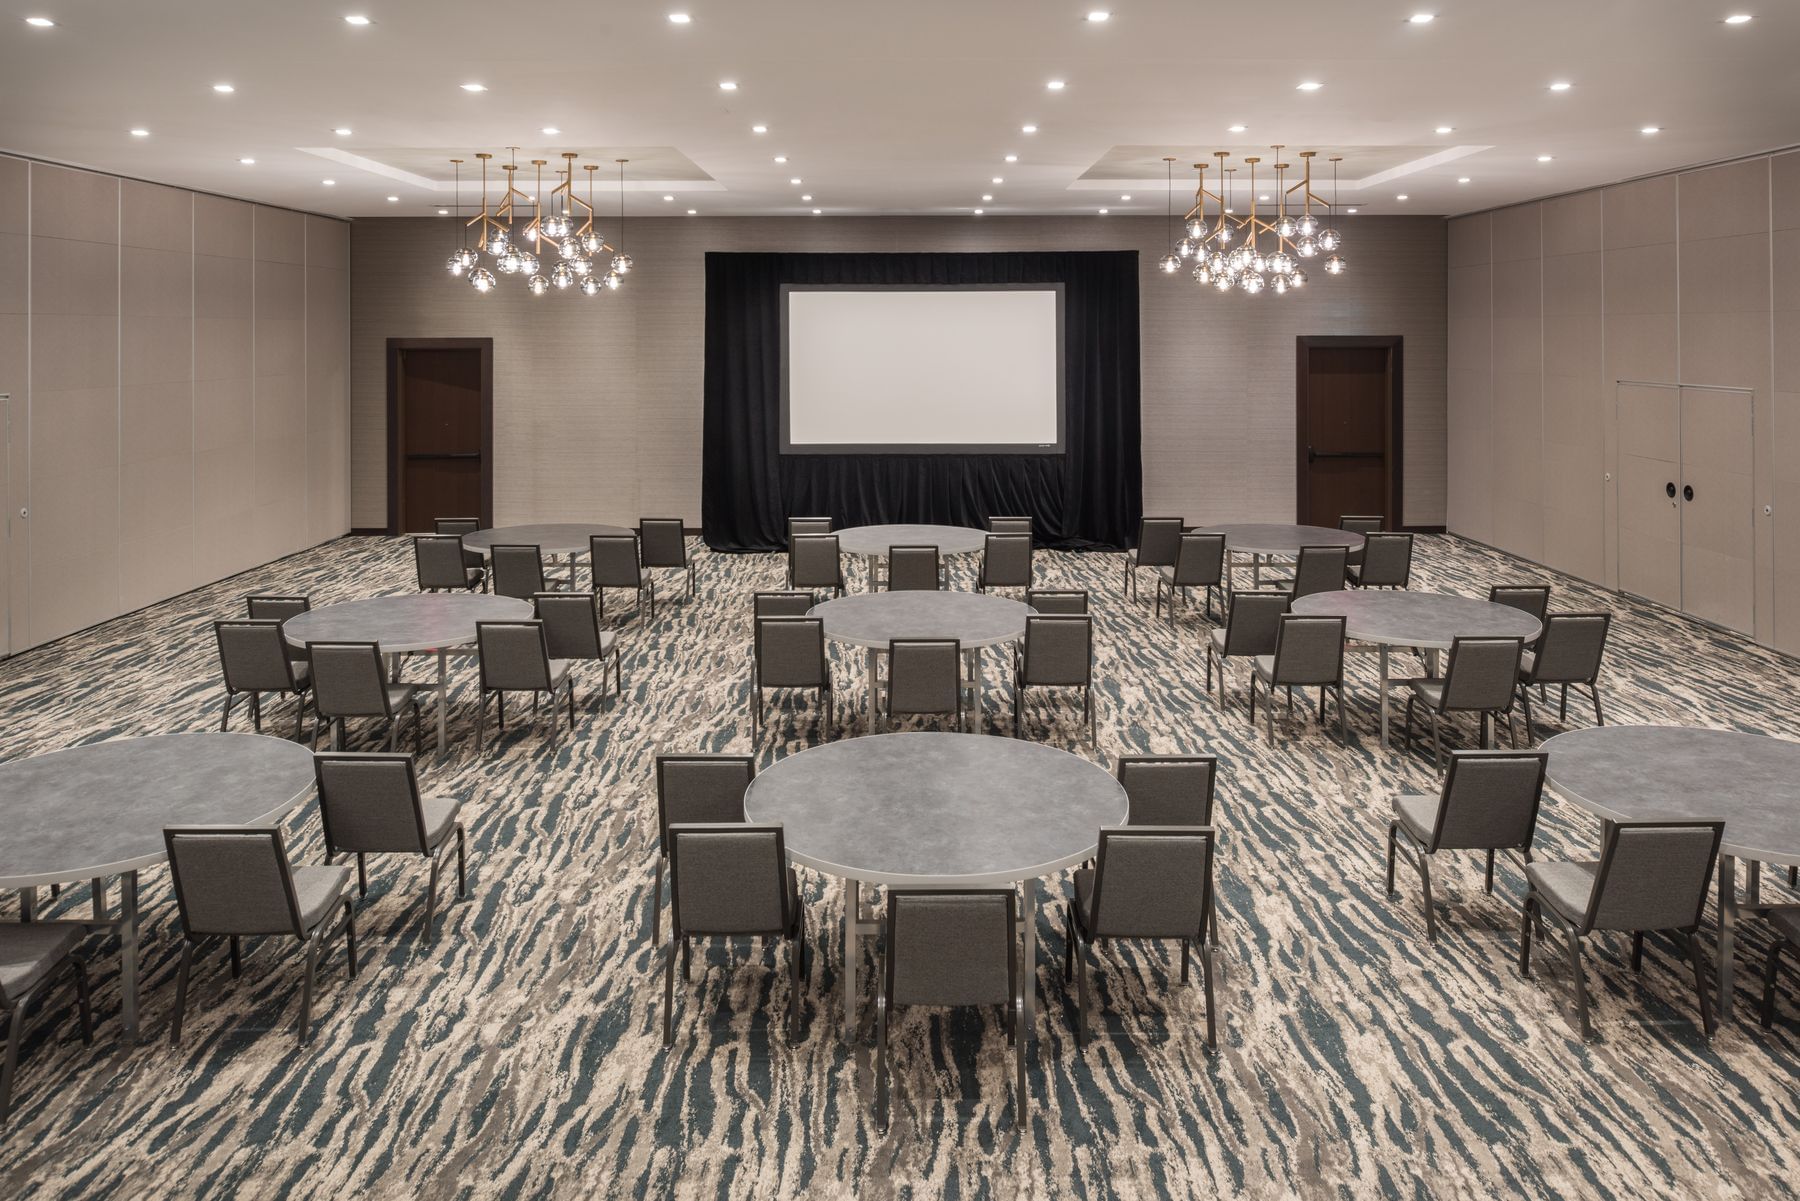 Meeting space set with banquet rounds